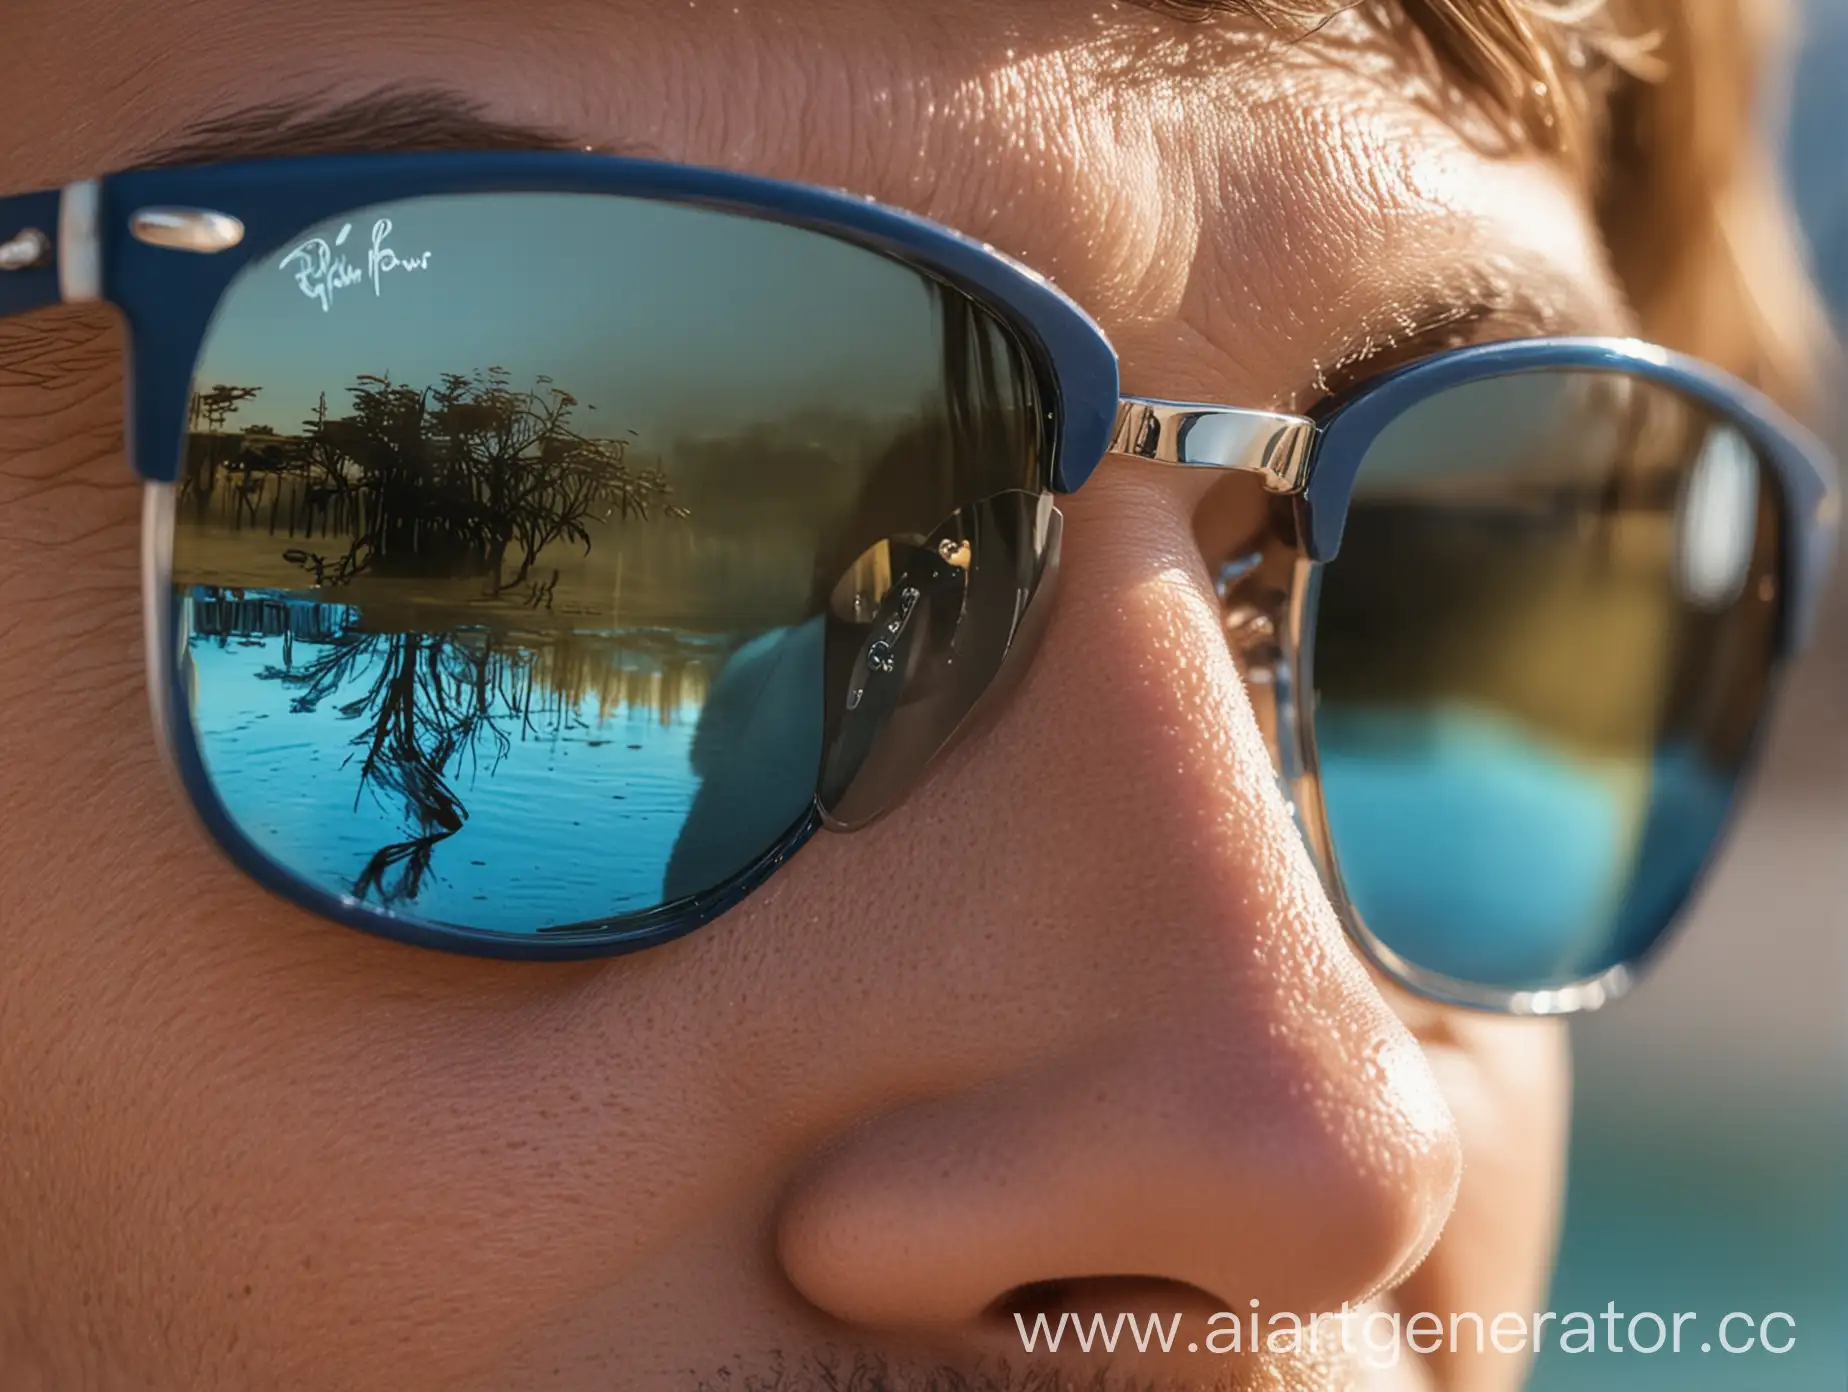 Reflection-of-Blue-Lenses-in-SunProtective-RayBan-Sunglasses